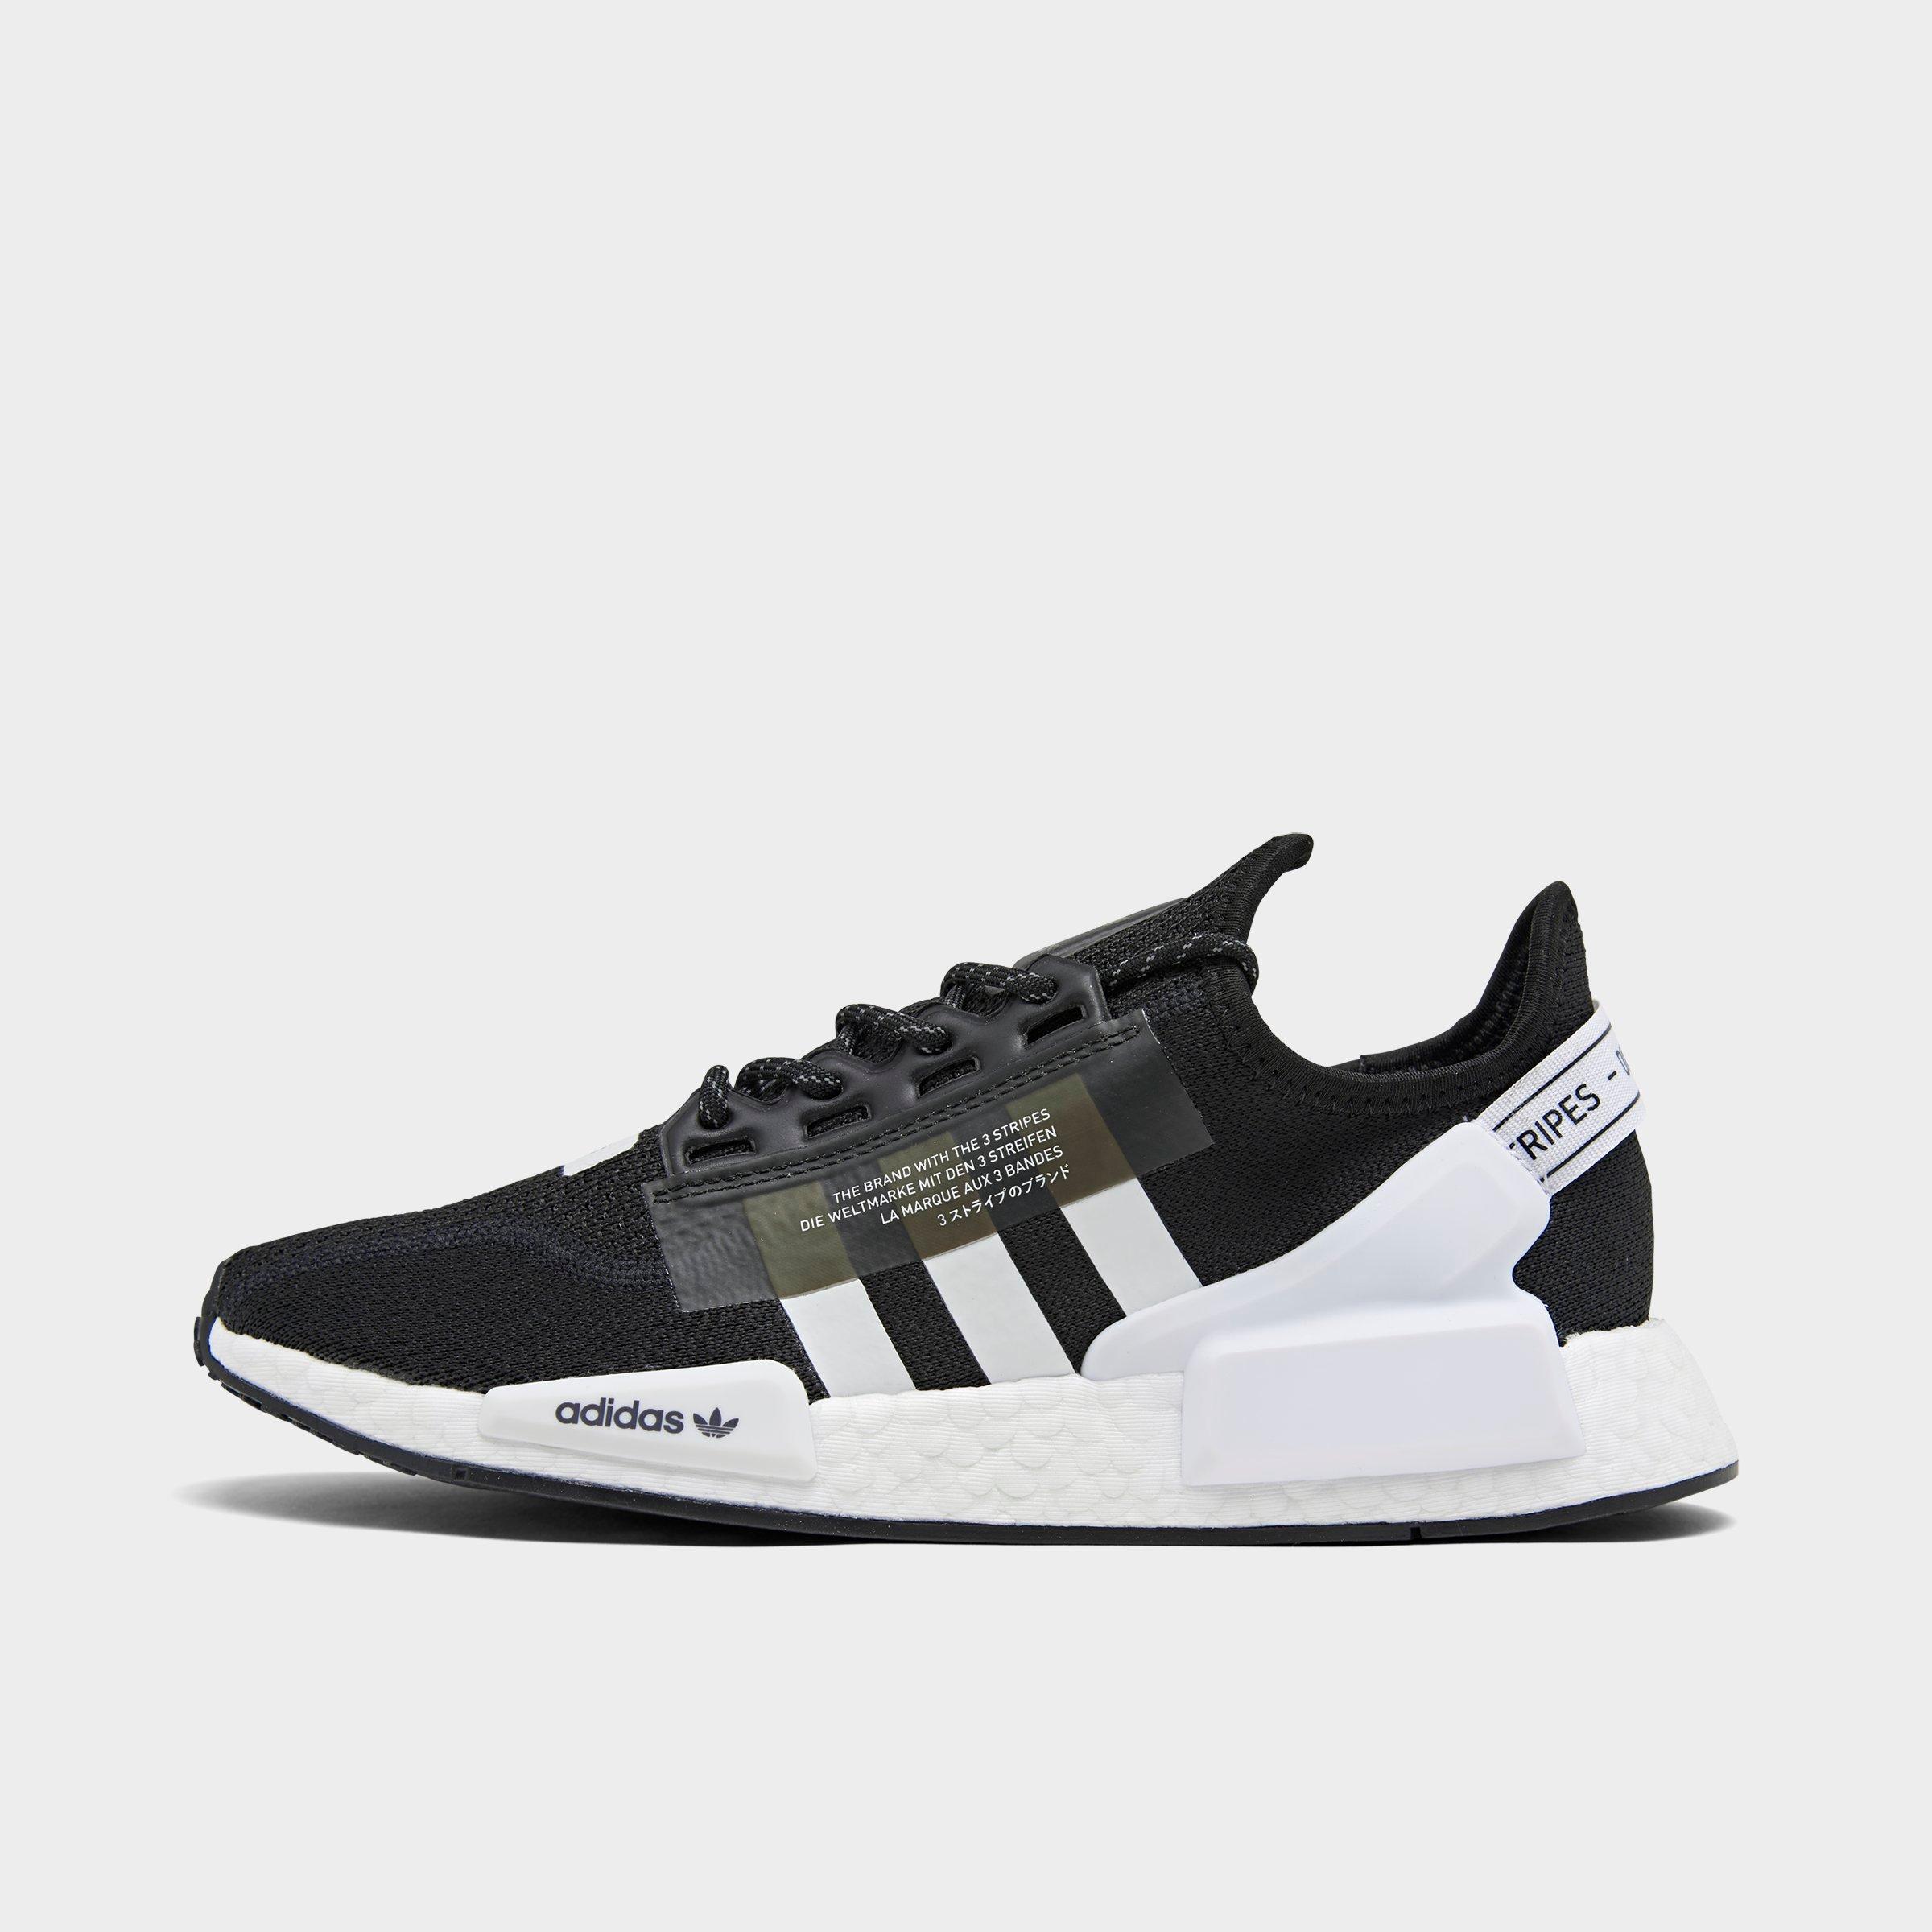 adidas NMD R1 PK White Tri Color W On Foot